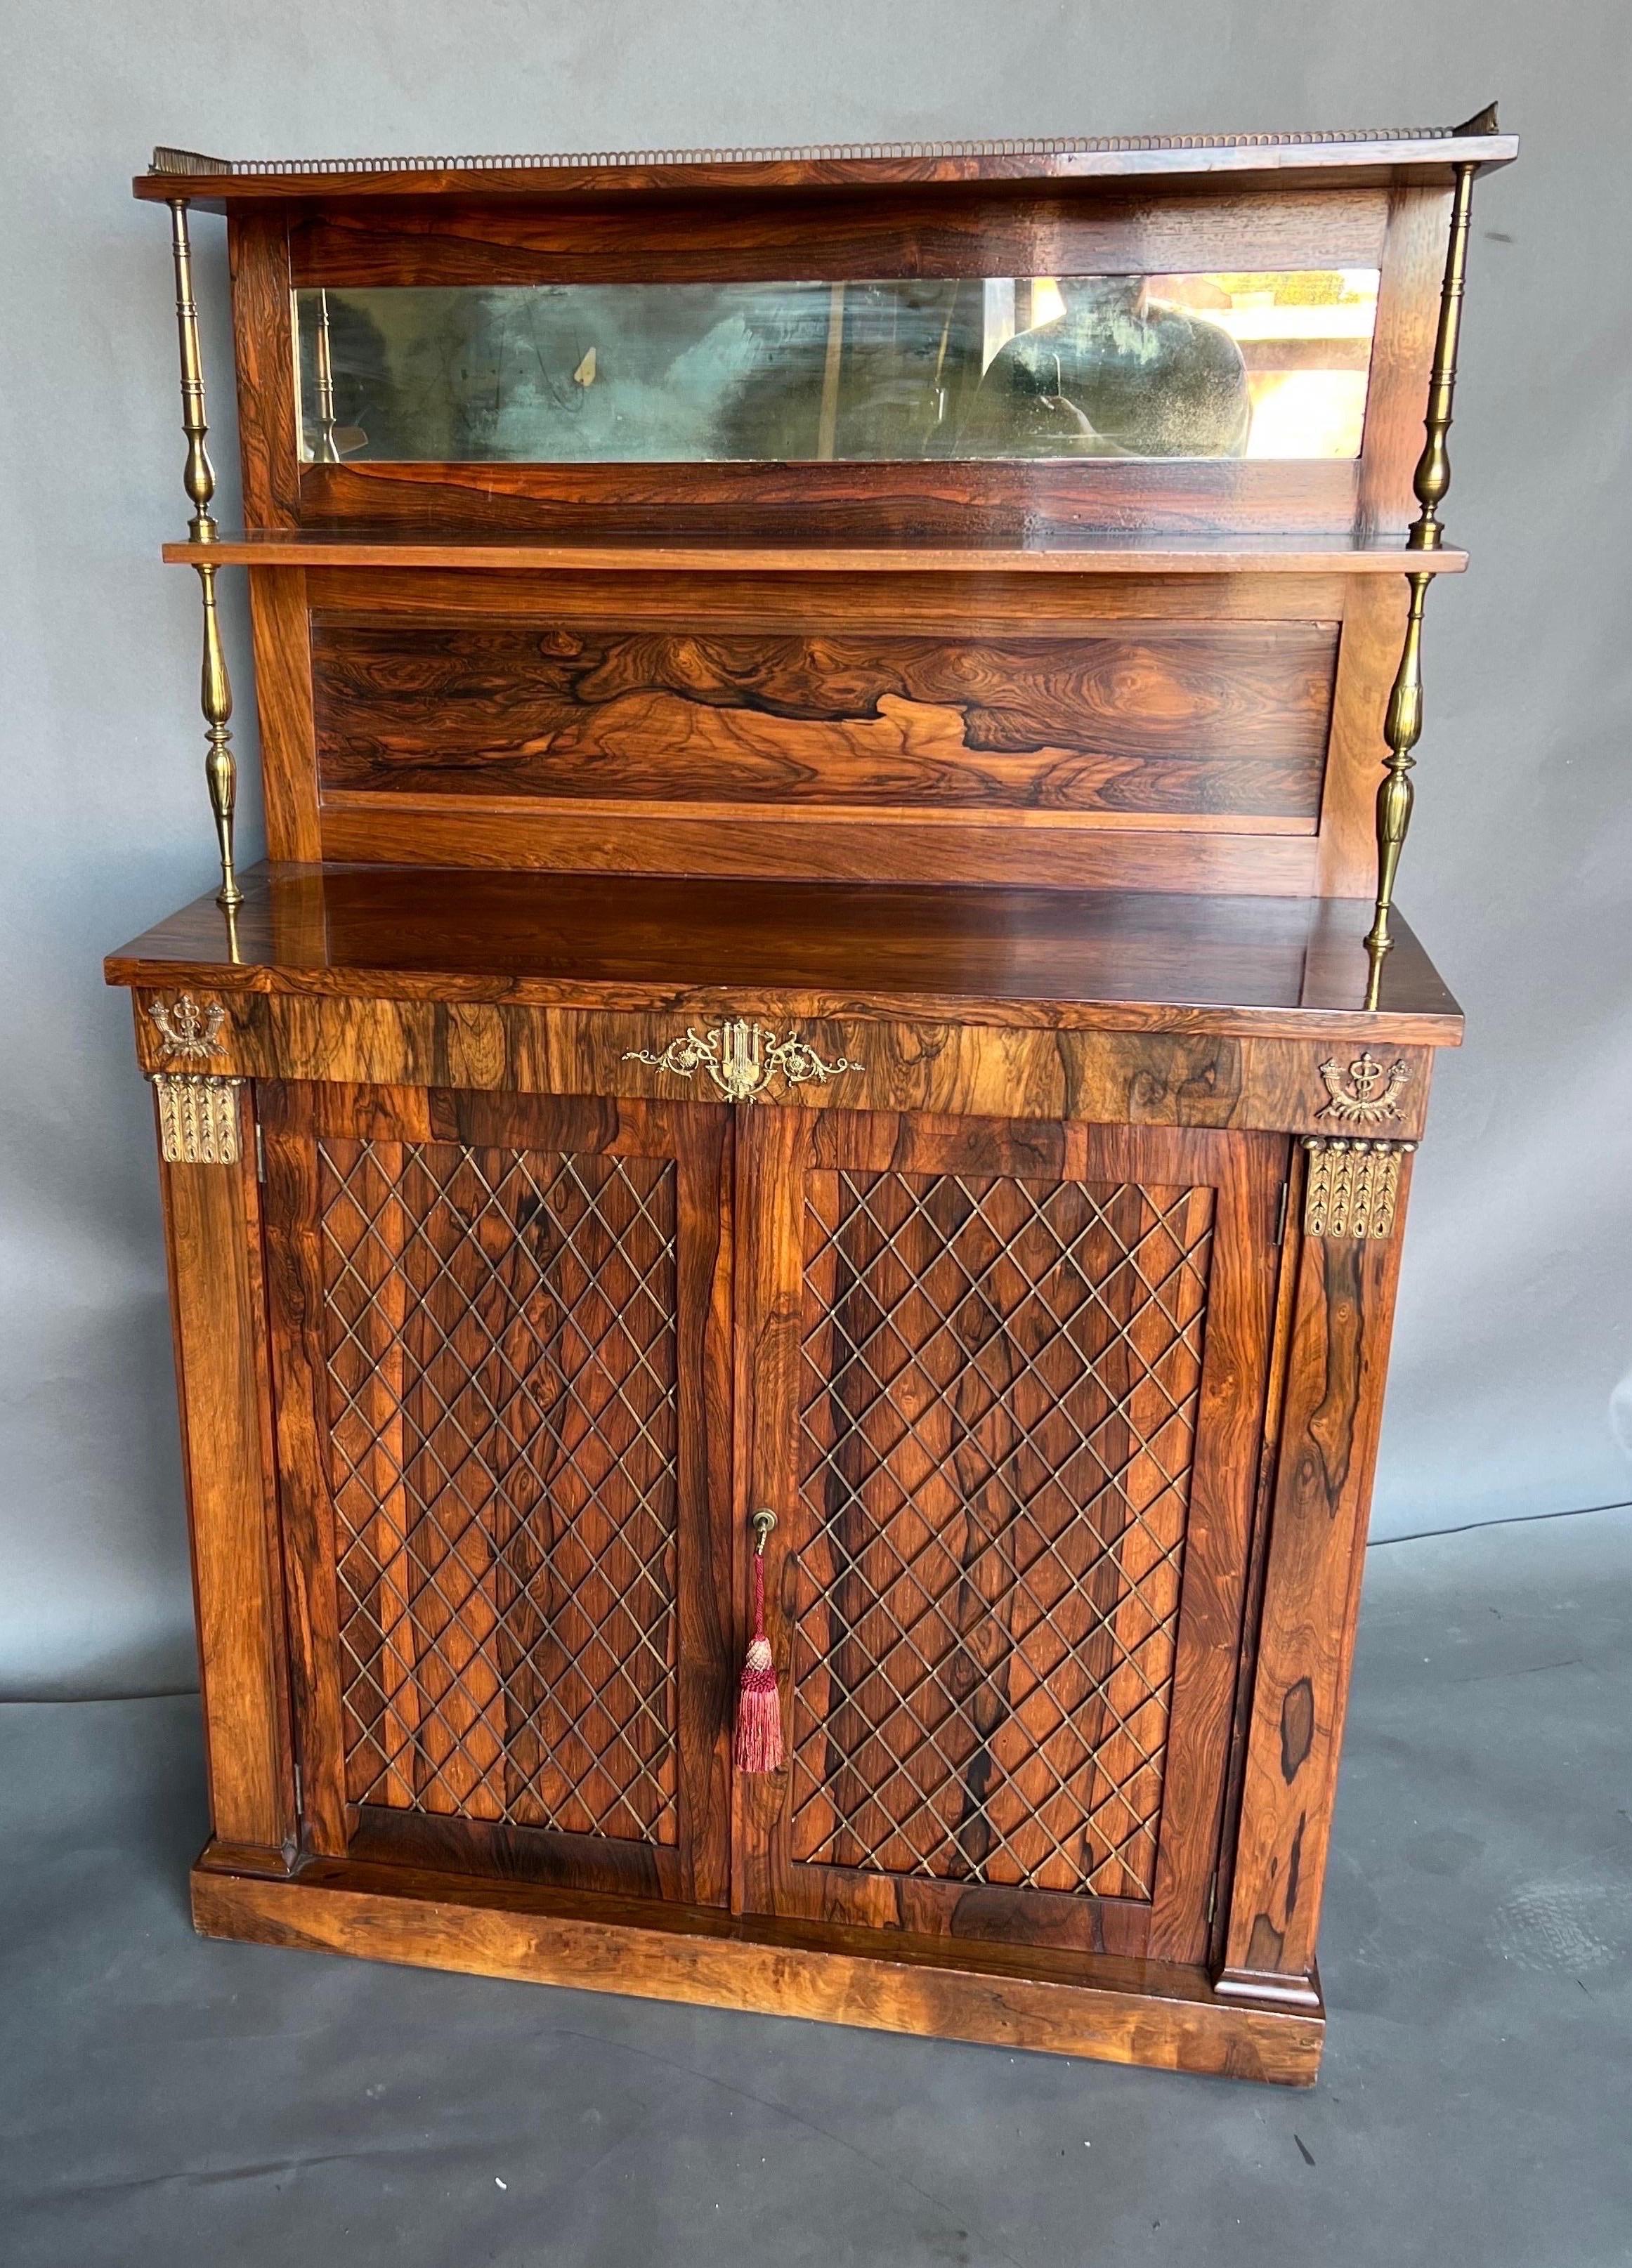 19th Century English Regency rosewood chiffonier or bar. Great size and color. The doors feature wire work over original rosewood panels instead of fabric. Great bronze mounts.